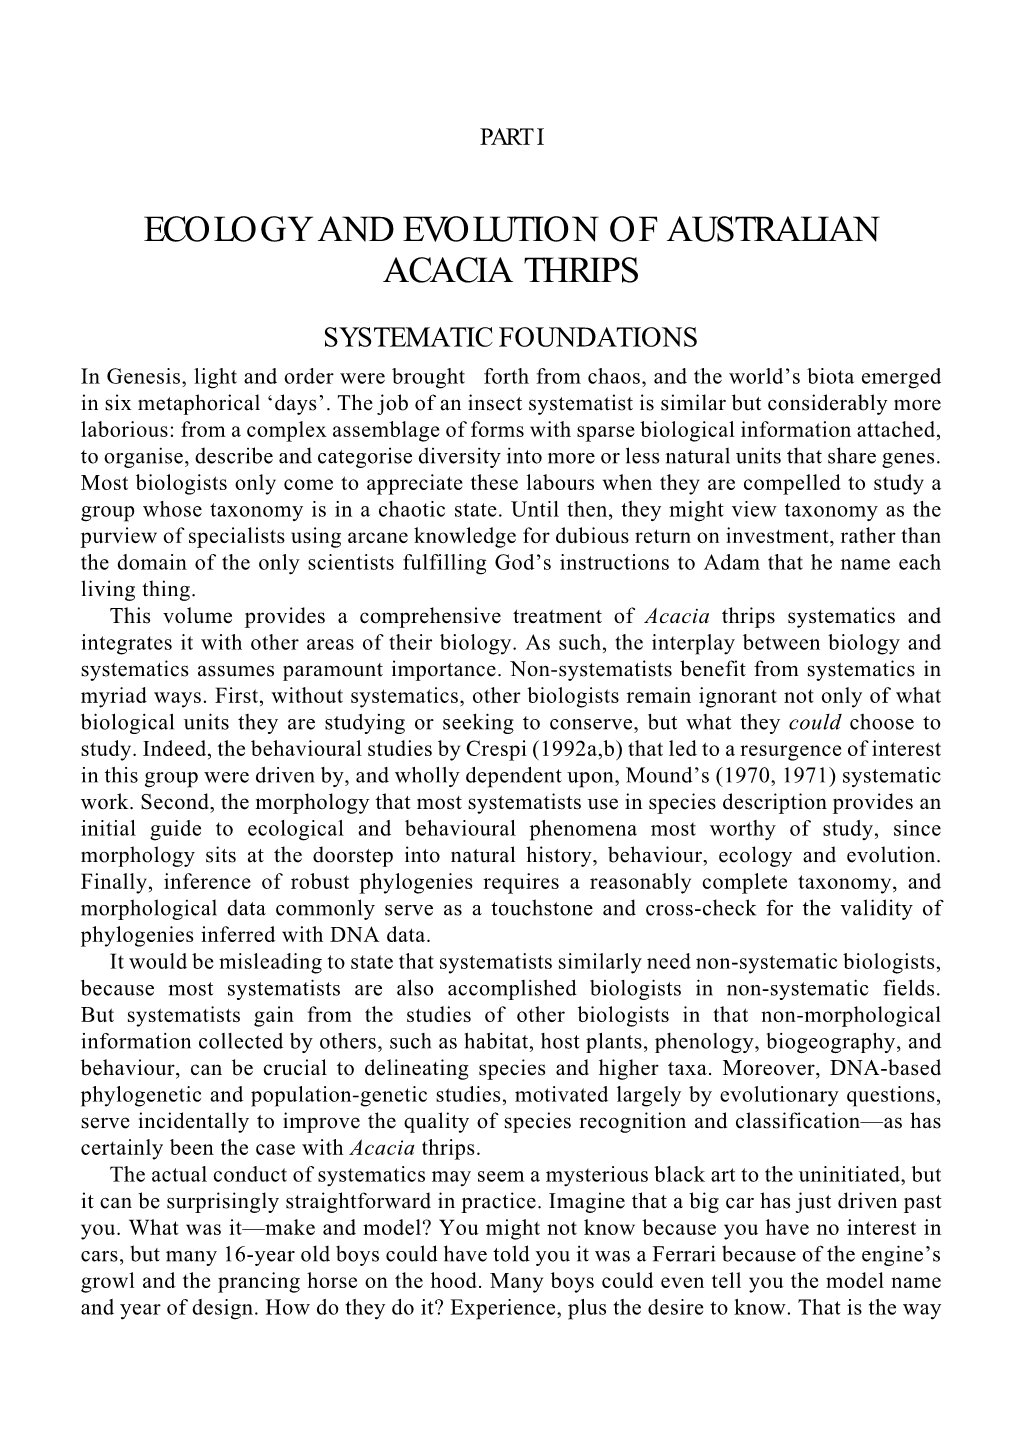 Pp11–32 Of: Evolution of Ecological and Behavioural Diversity: Australian Acacia Thrips As Model Organisms